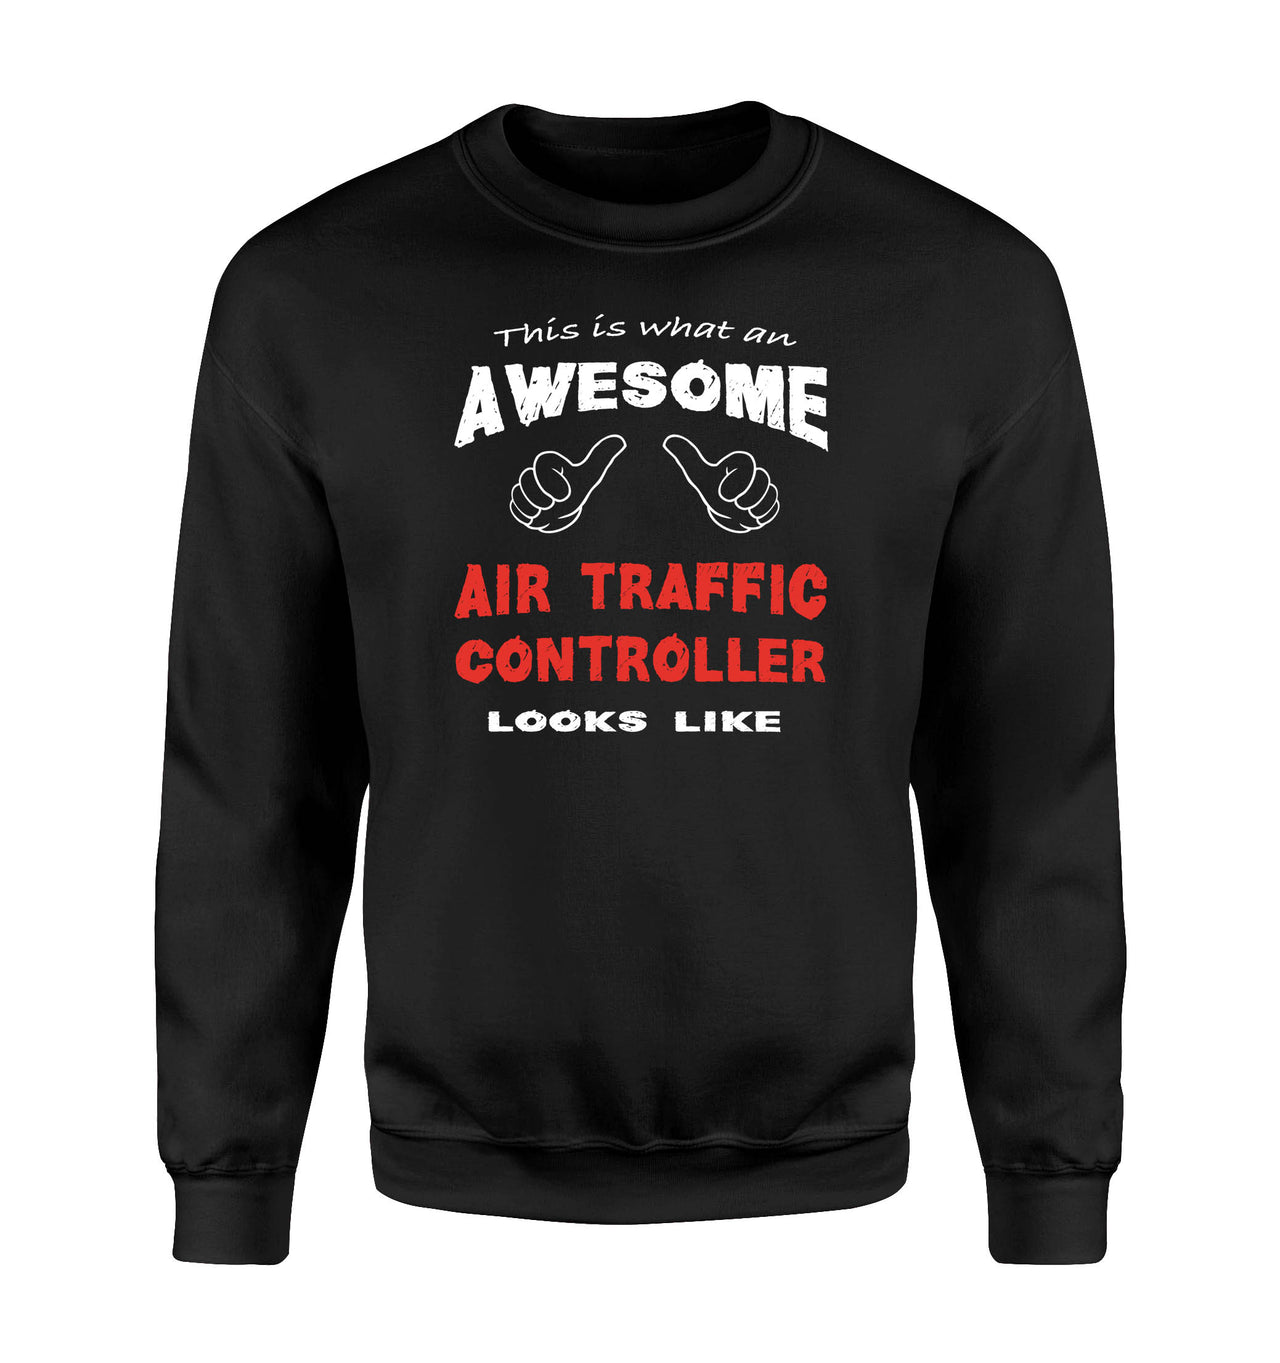 This is What an Awesome Air Traffic Controller Looks Like Sweatshirts